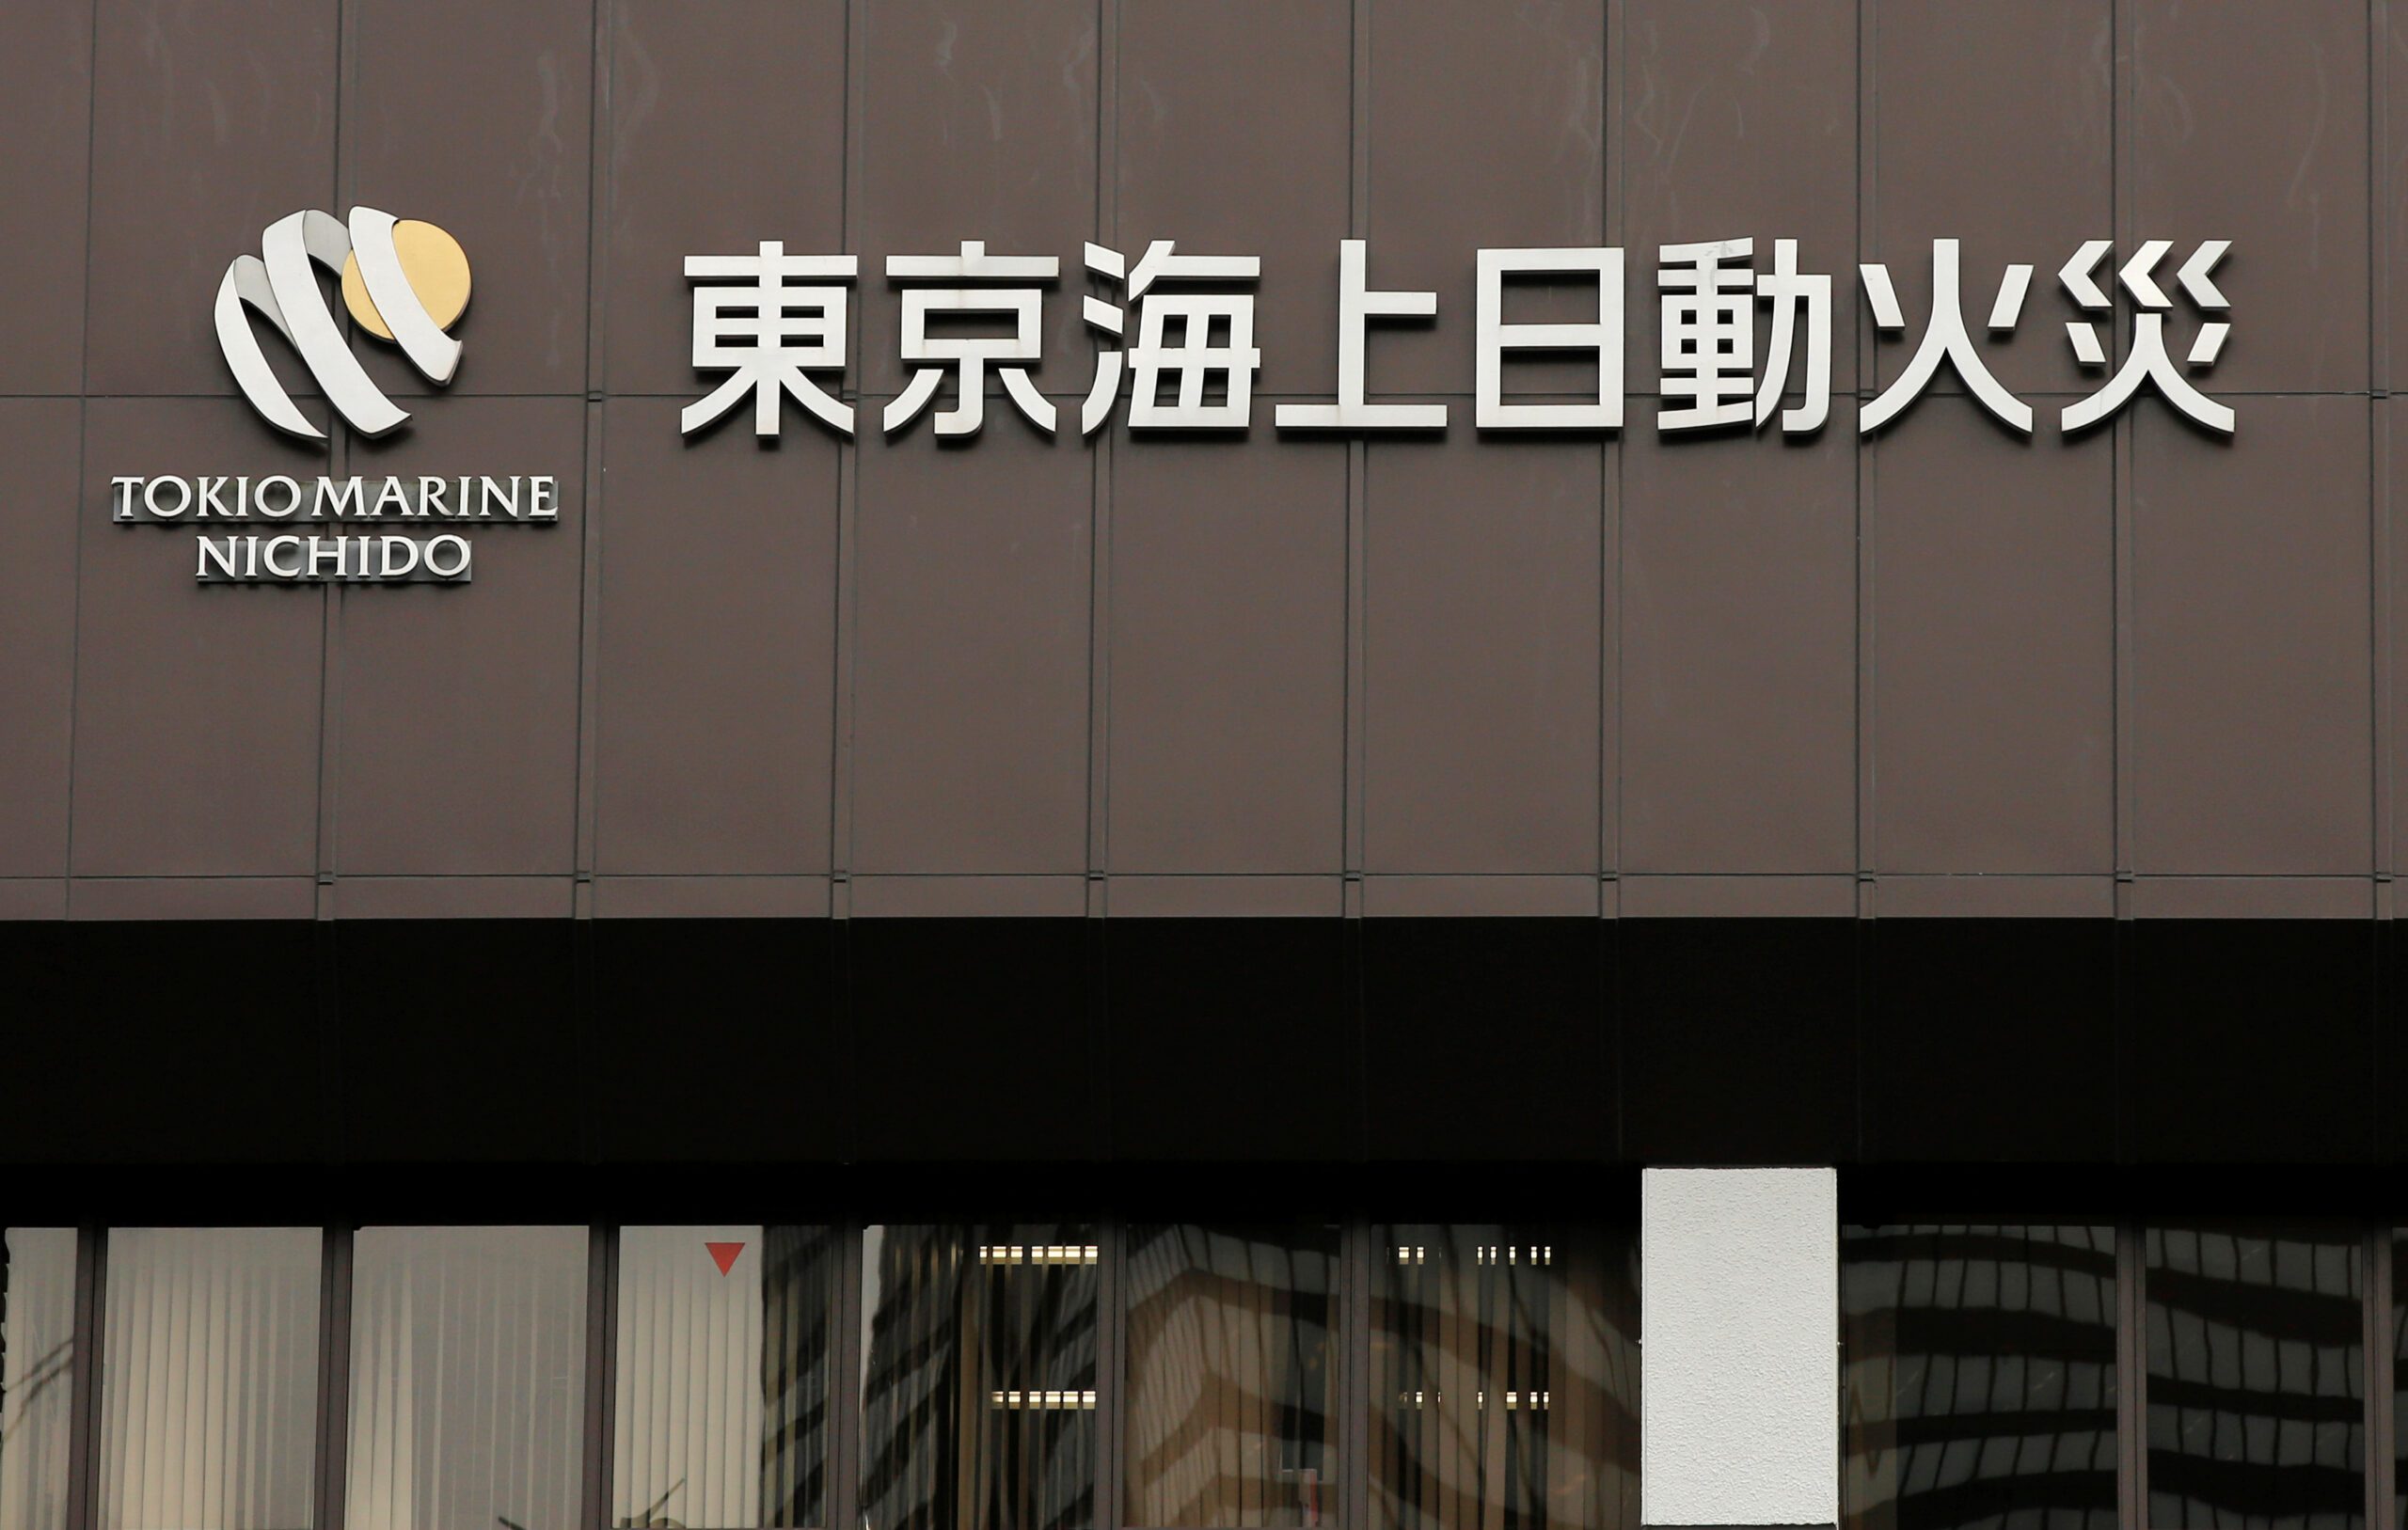 Japanese insurer Tokio Marine has $10b for potential acquisitions